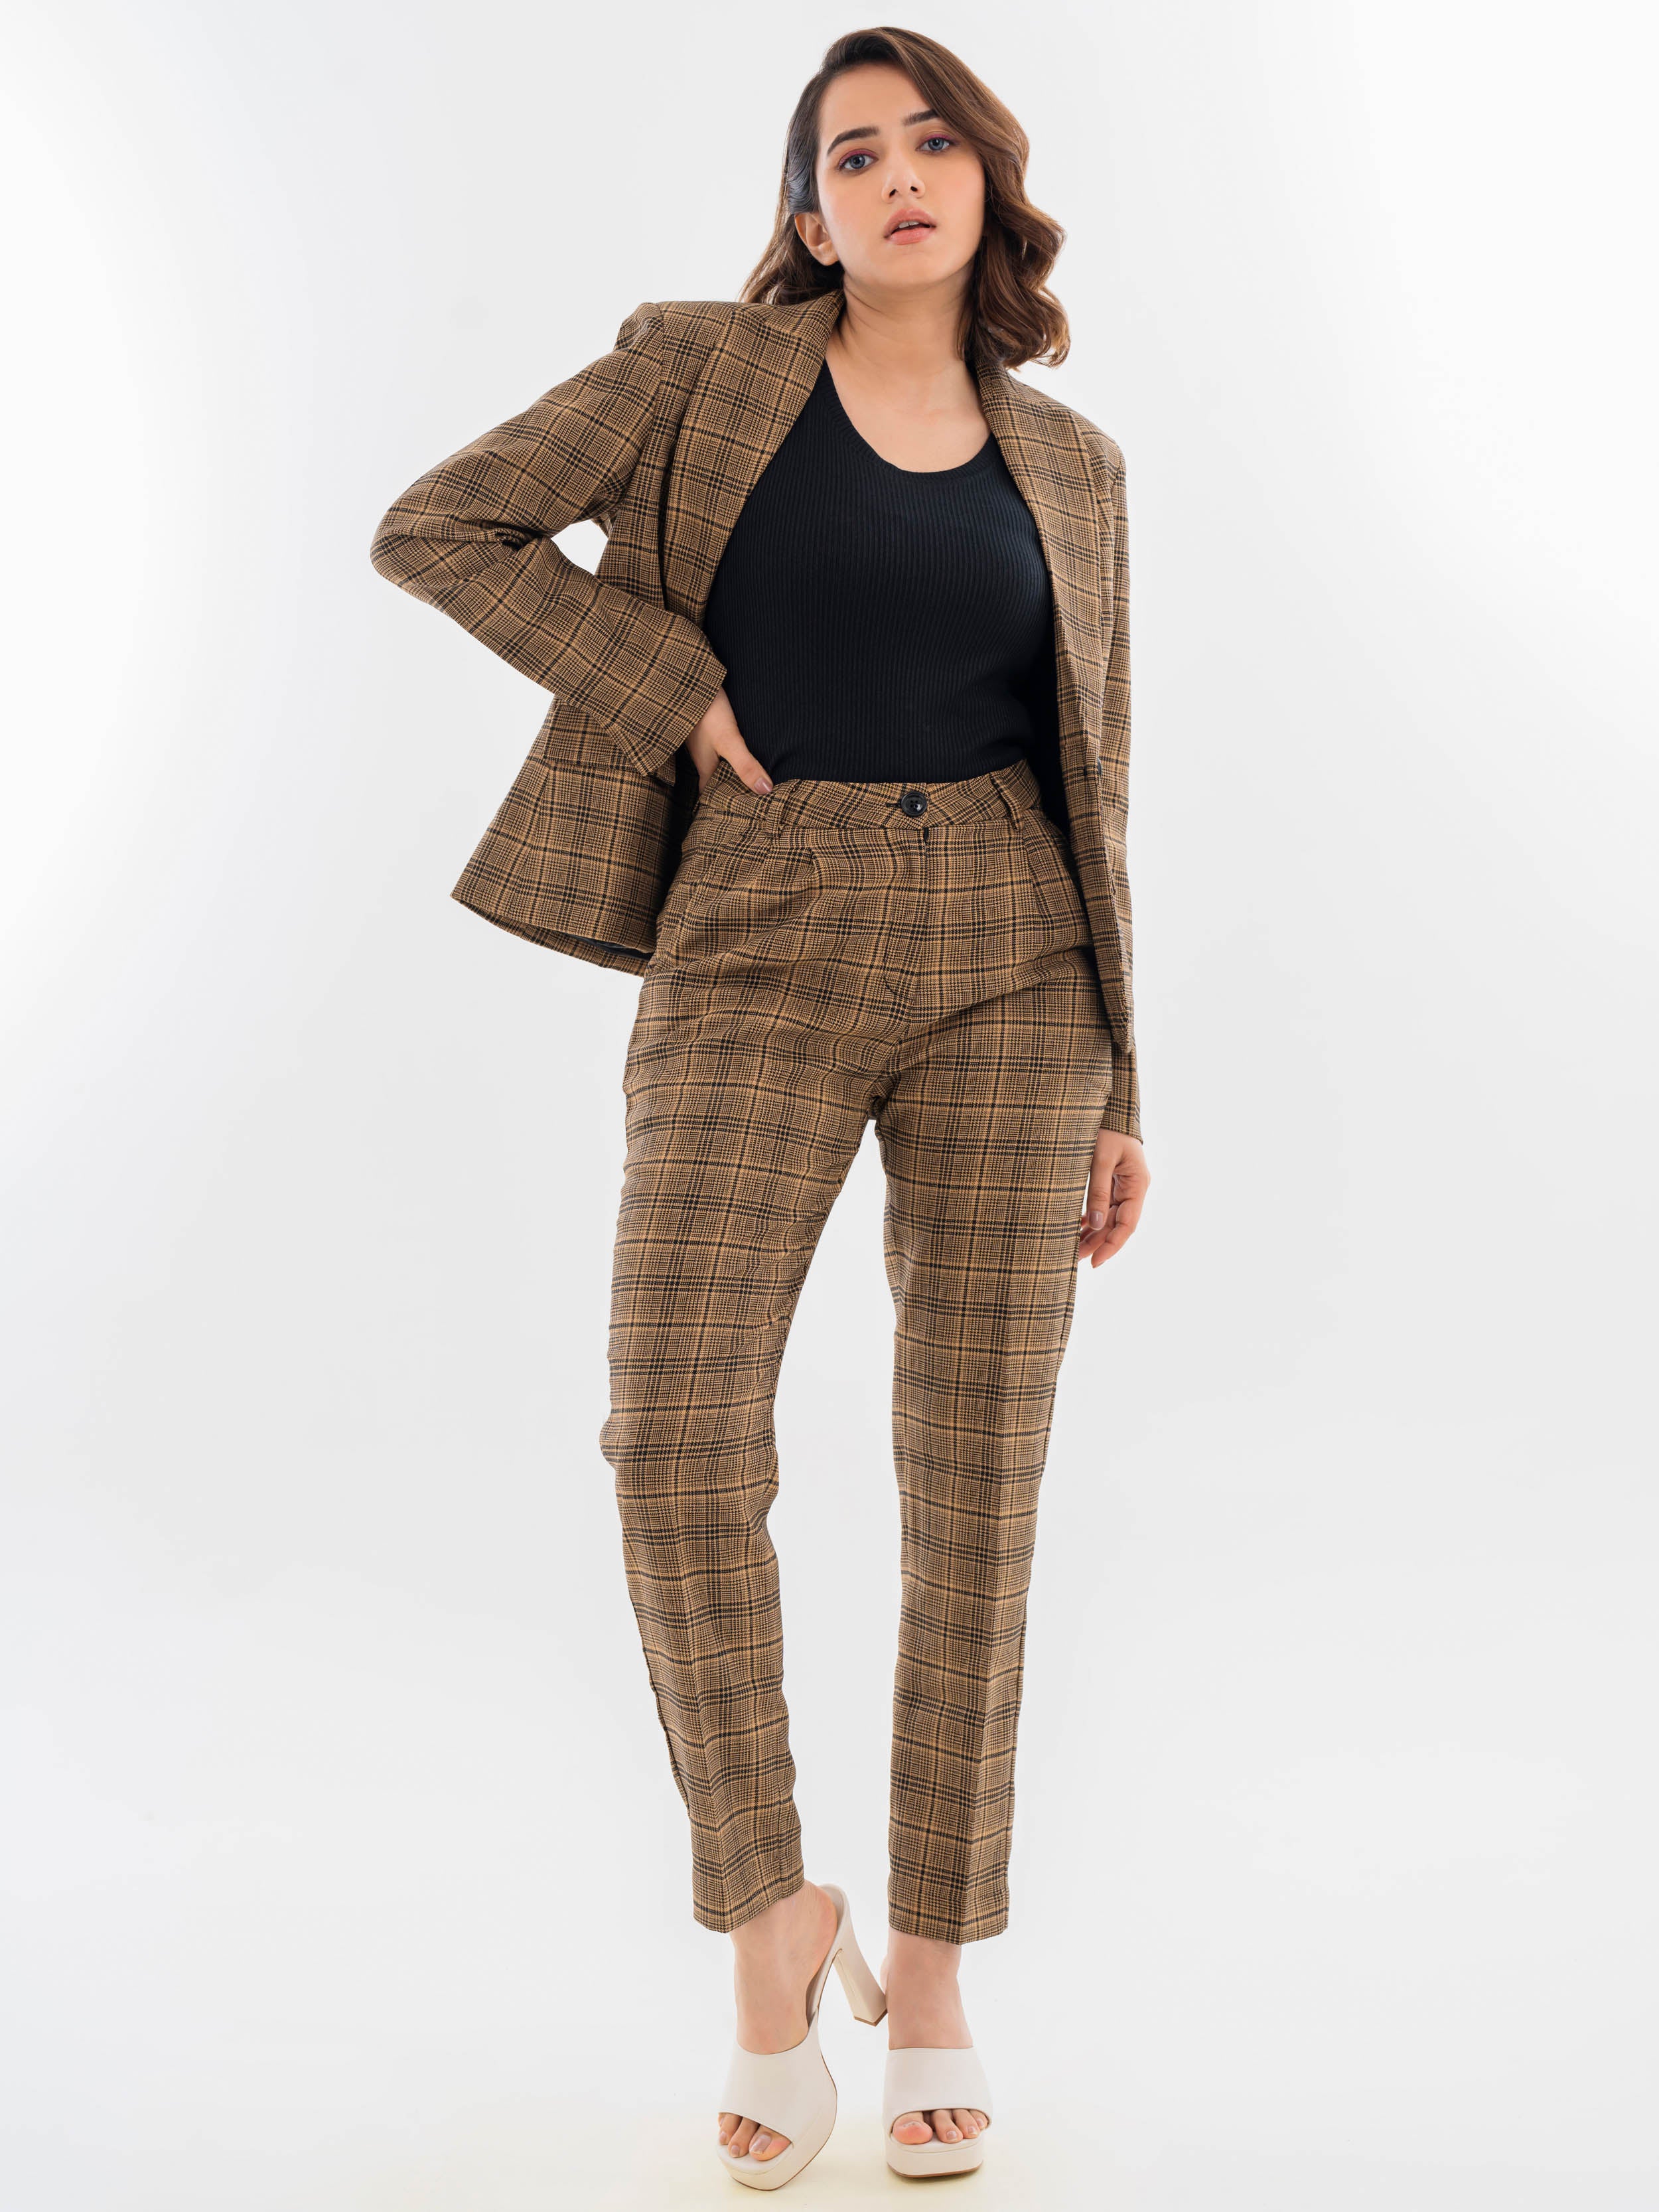 Your First Fall Finds Under $100 | Plaid outfits, Fall fashion outfits,  Brown pants outfit